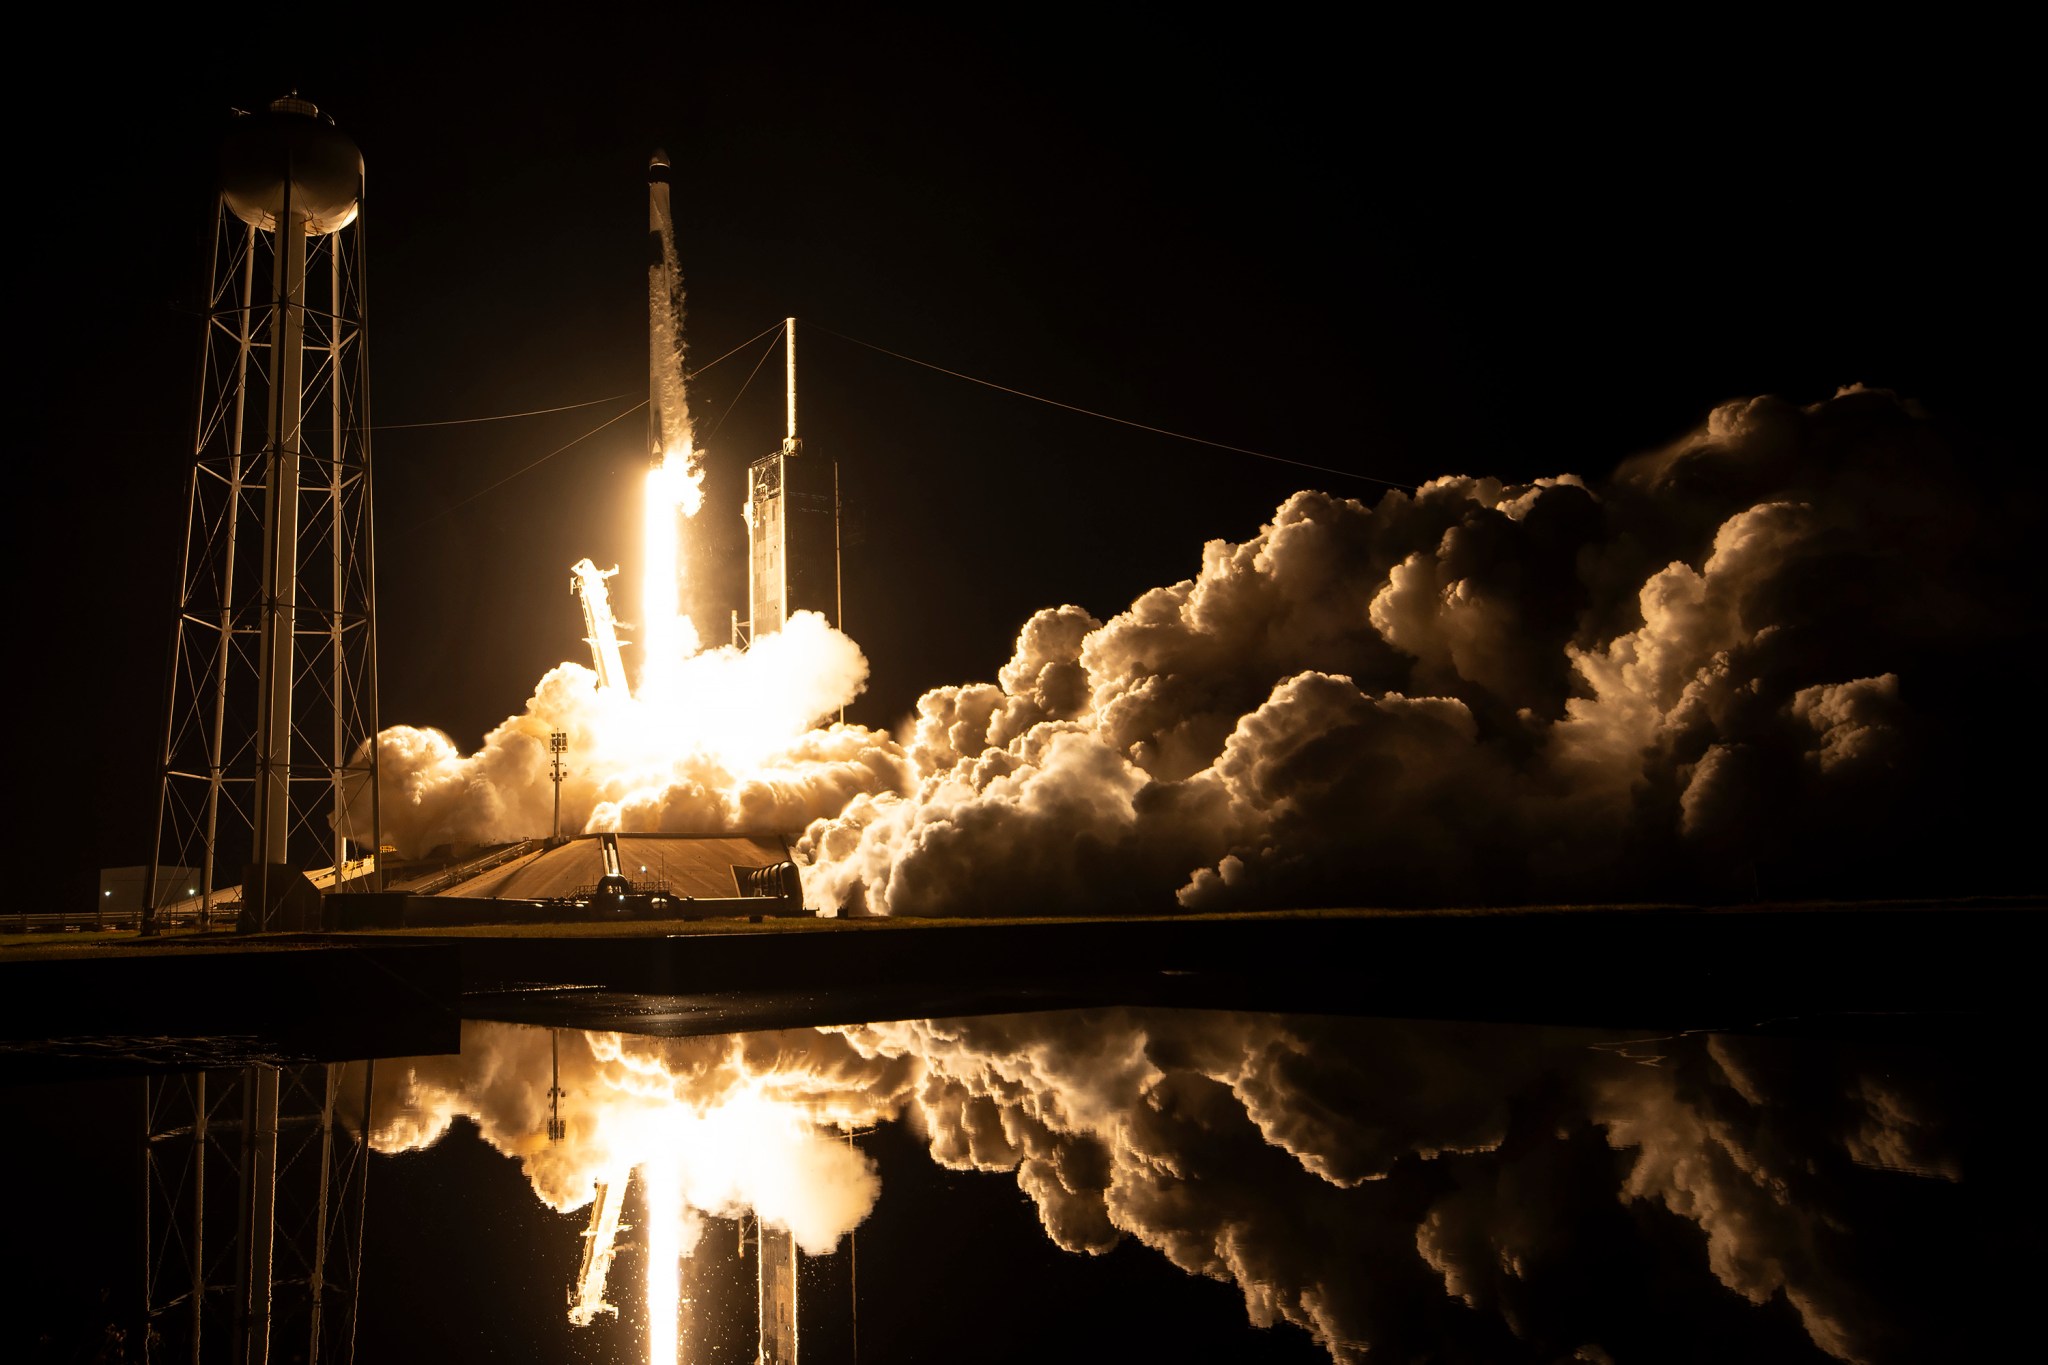 SpaceX Falcon 9 rocket and uncrewed Dragon spacecraft lift off from Kennedy Space Center's Launch Pad 39A for NASA and SpaceX's 29th resupply services mission to the International Space Station.